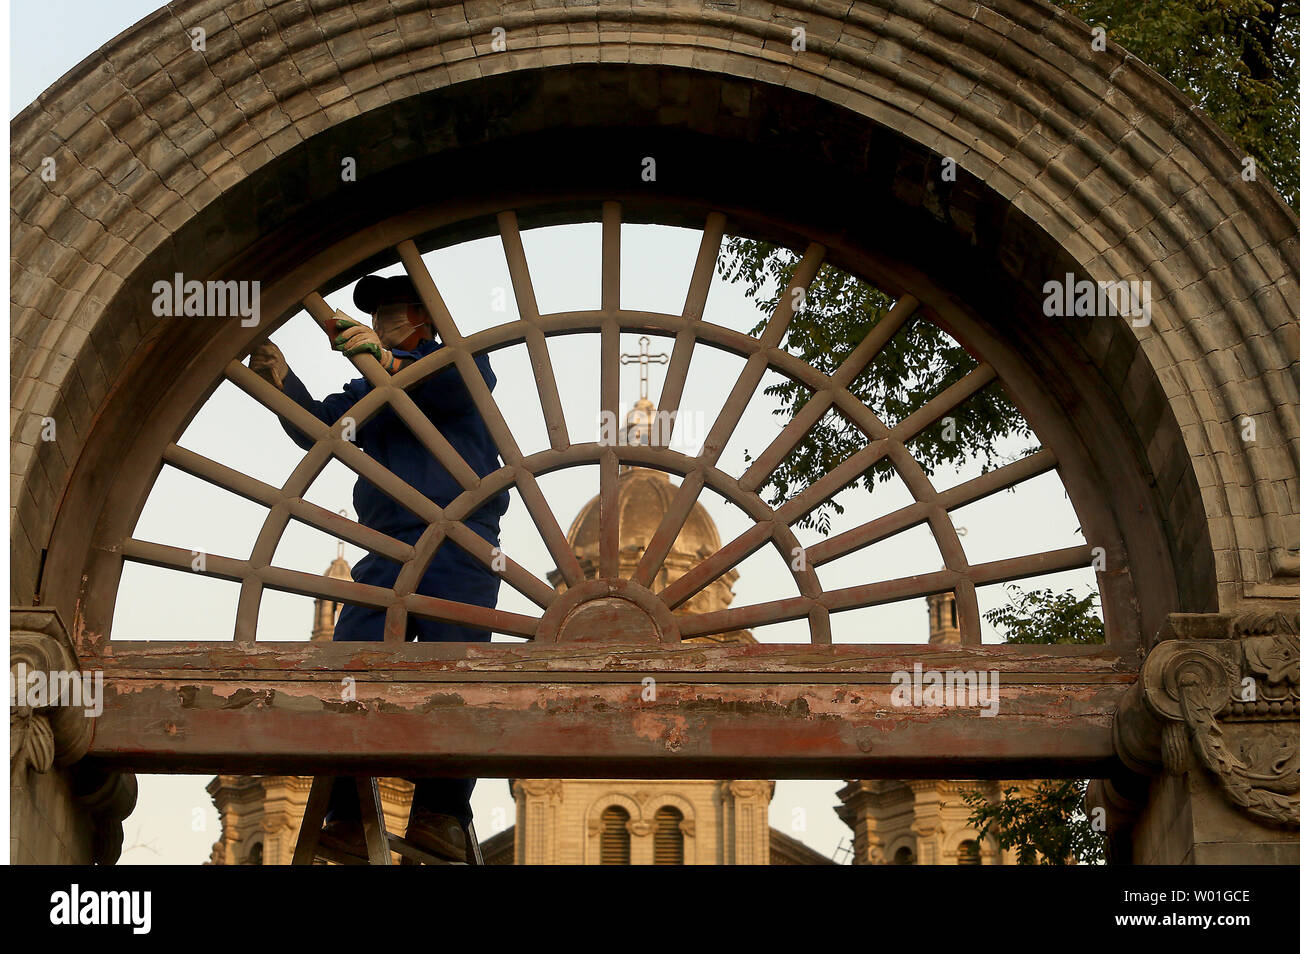 A Chinese worker climbs a ladder to peel off old paint on a gate in front of St. Joseph's Church, one of the oldest Catholic churches still open, in central Beijing on November 19, 2018.  The church has been destroyed twice in the past due to prior governments' anti-Western sentiments and policies, but was opened recently for religious services.     Photo by Stephen Shaver/UPI Stock Photo